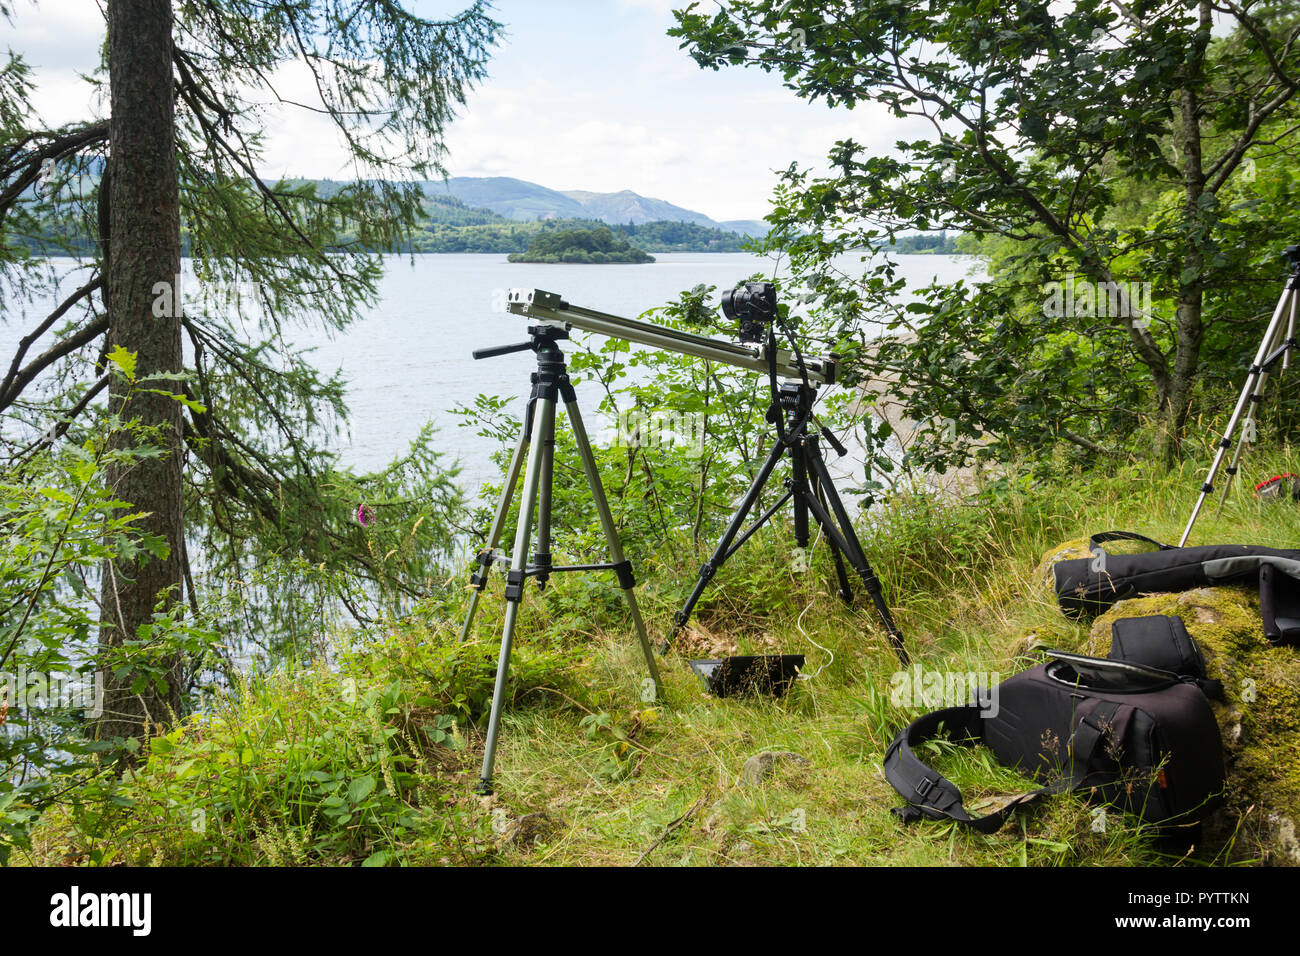 Timelapse setup. A Canon Powershot camera is mounted on a home-made motorised camera slider, on the banks of Derwentwater for timelapse filming. Stock Photo